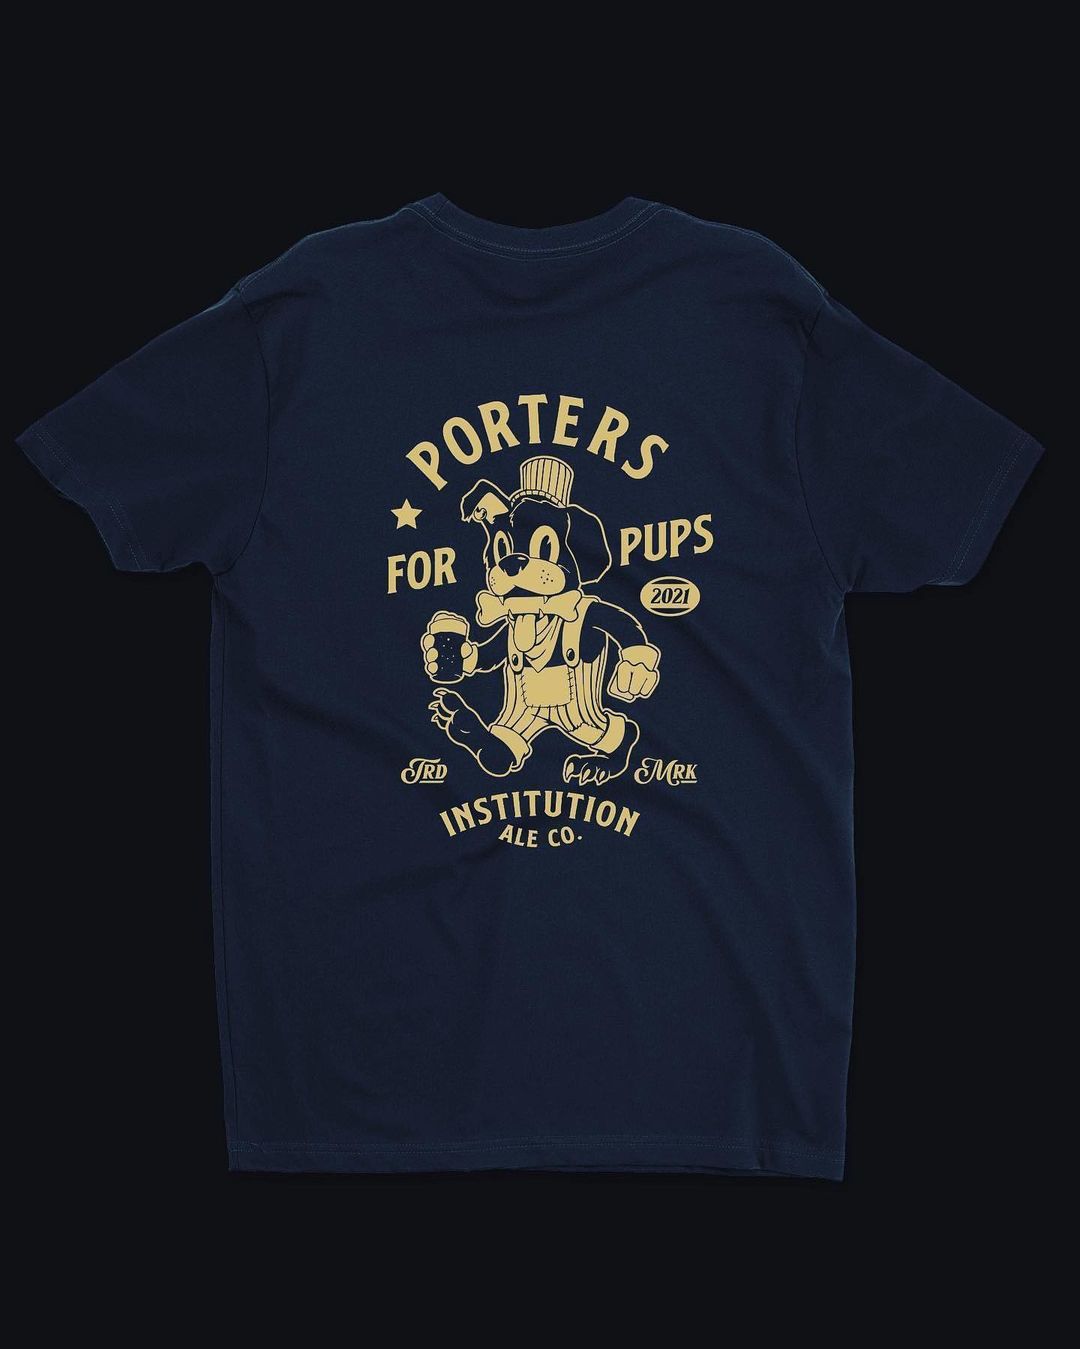 All November long, our friends over at @institutionales @institutionales_sb will be raising funds for our local animal shelters with their annual Porters For Pups🐶fundraiser!
​
​Participating is easy; purchase a Porters For Pups shirt, glass, or their Rye Porter, Ratched!
​
​They will be donating a portion of proceeds to our friends at  @vcanimalservices & Santa Barbara County Animal Services. Stop by either one of their locations in November to snag the limited edition merch. Thank you all for your support❣️. <a target='_blank' href='https://www.instagram.com/explore/tags/PortersForPups2021/'>#PortersForPups2021</a> <a target='_blank' href='https://www.instagram.com/explore/tags/VCAS/'>#VCAS</a> <a target='_blank' href='https://www.instagram.com/explore/tags/SBCAS/'>#SBCAS</a> <a target='_blank' href='https://www.instagram.com/explore/tags/partnerships/'>#partnerships</a> <a target='_blank' href='https://www.instagram.com/explore/tags/institutionalecompany/'>#institutionalecompany</a>